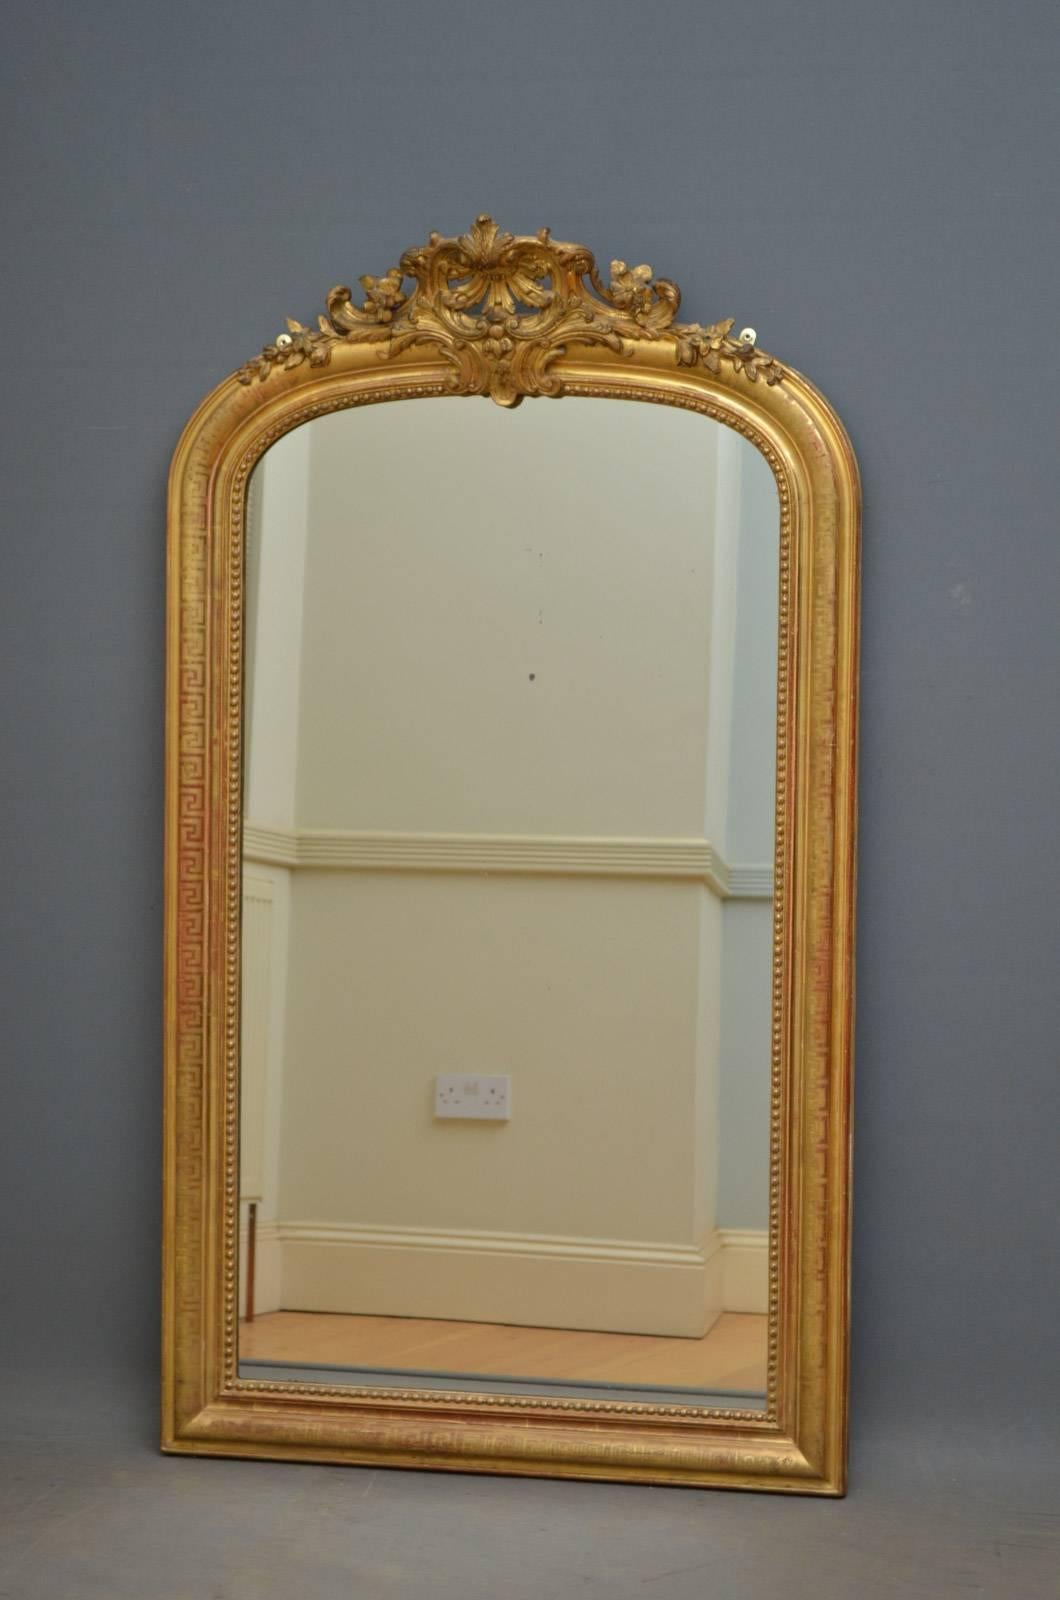 Sn4330 Fine giltwood pier mirror with elegant cartouche to centre and original mirror plate with some foxing with Greek key decorated frame, all in excellent original condition throughout. This antique mirror is ready to place at home, circa